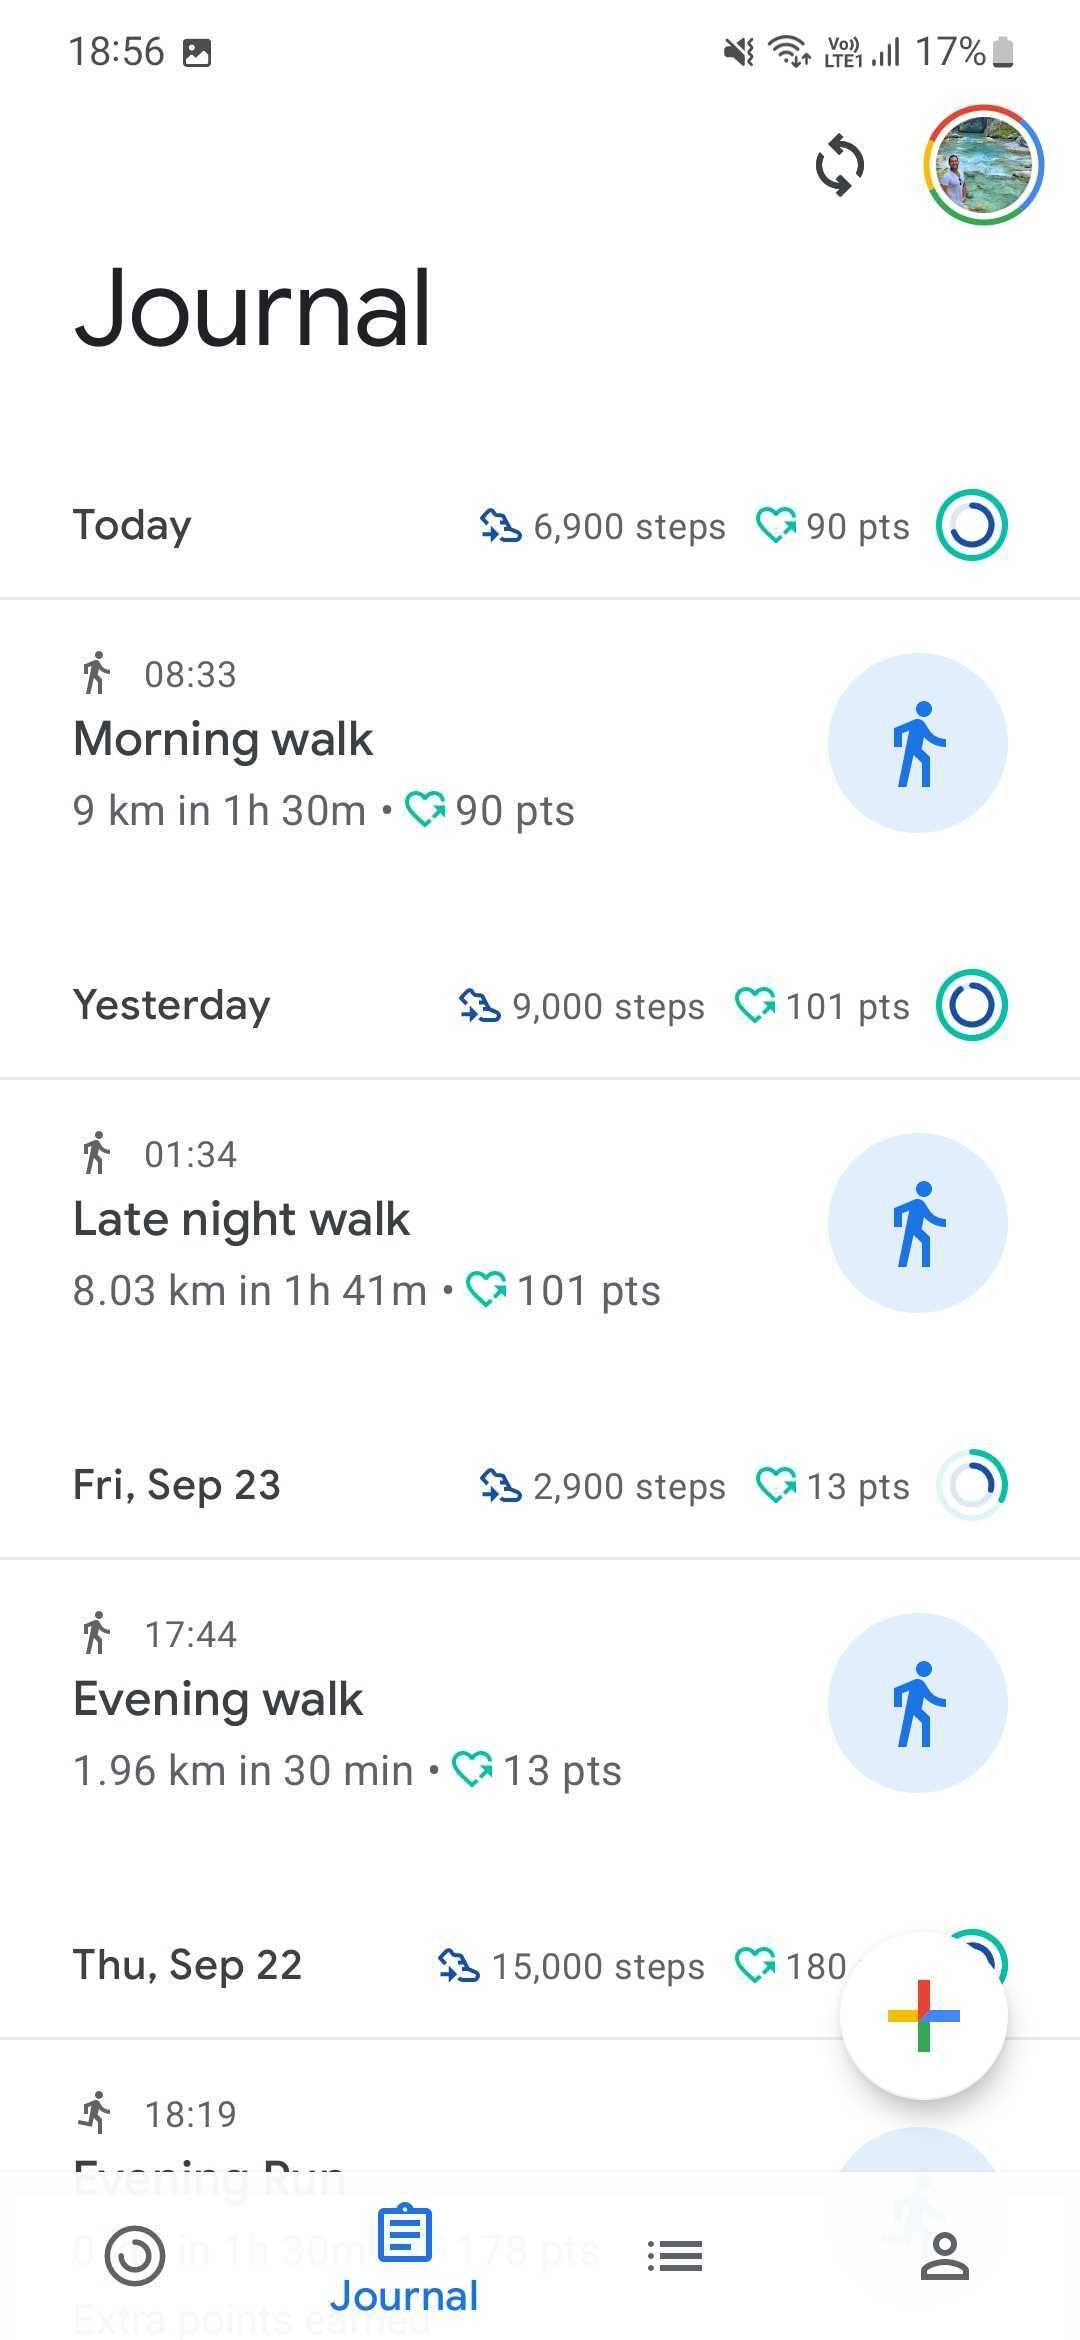 Screenshot of the Google Fit app showing the activity journal with past workouts and exercices